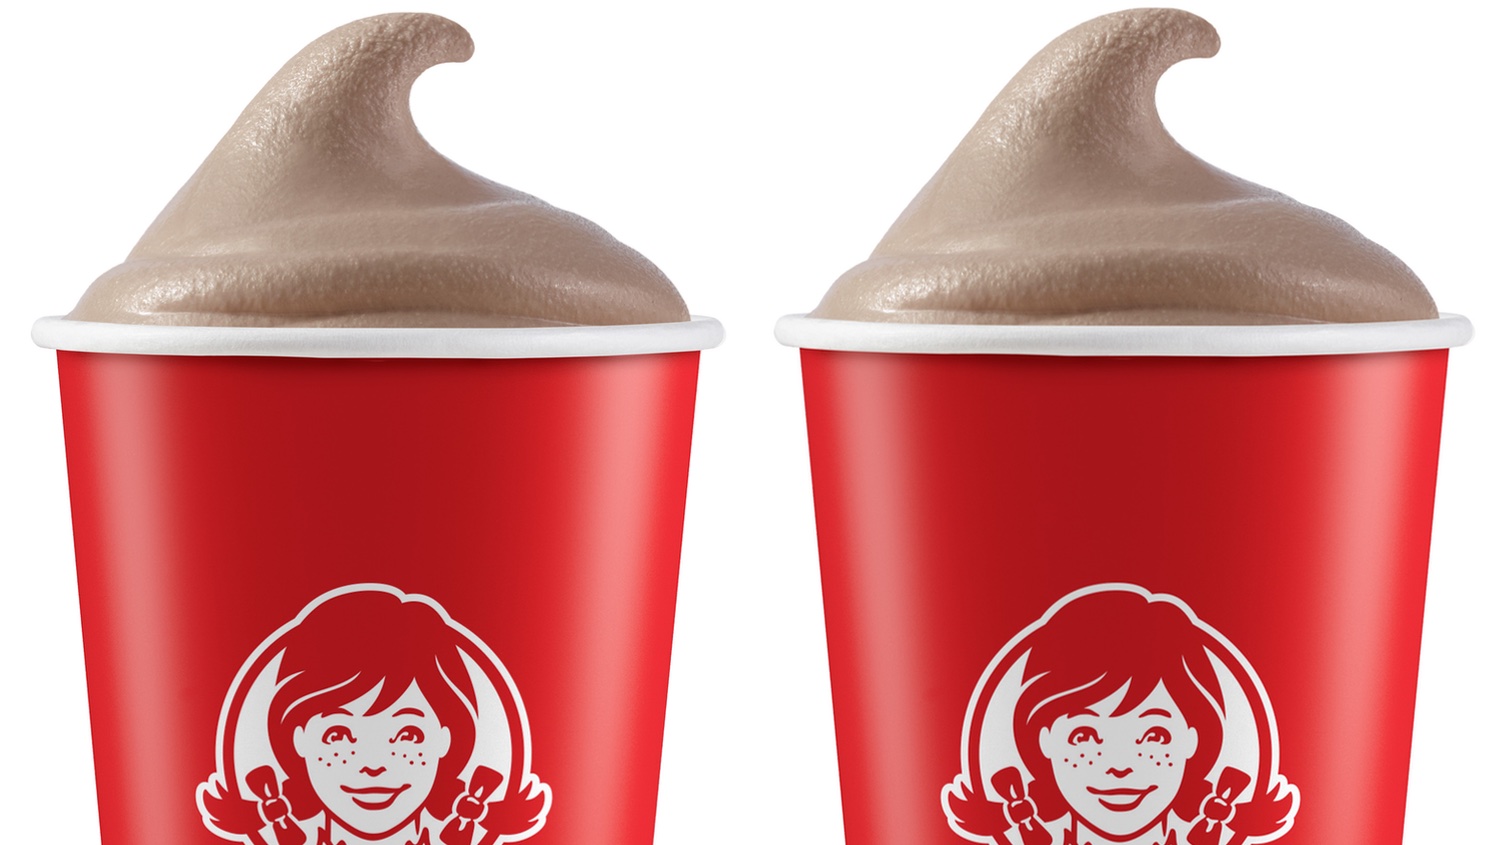 Wendy's chocolate Frostys in red cups